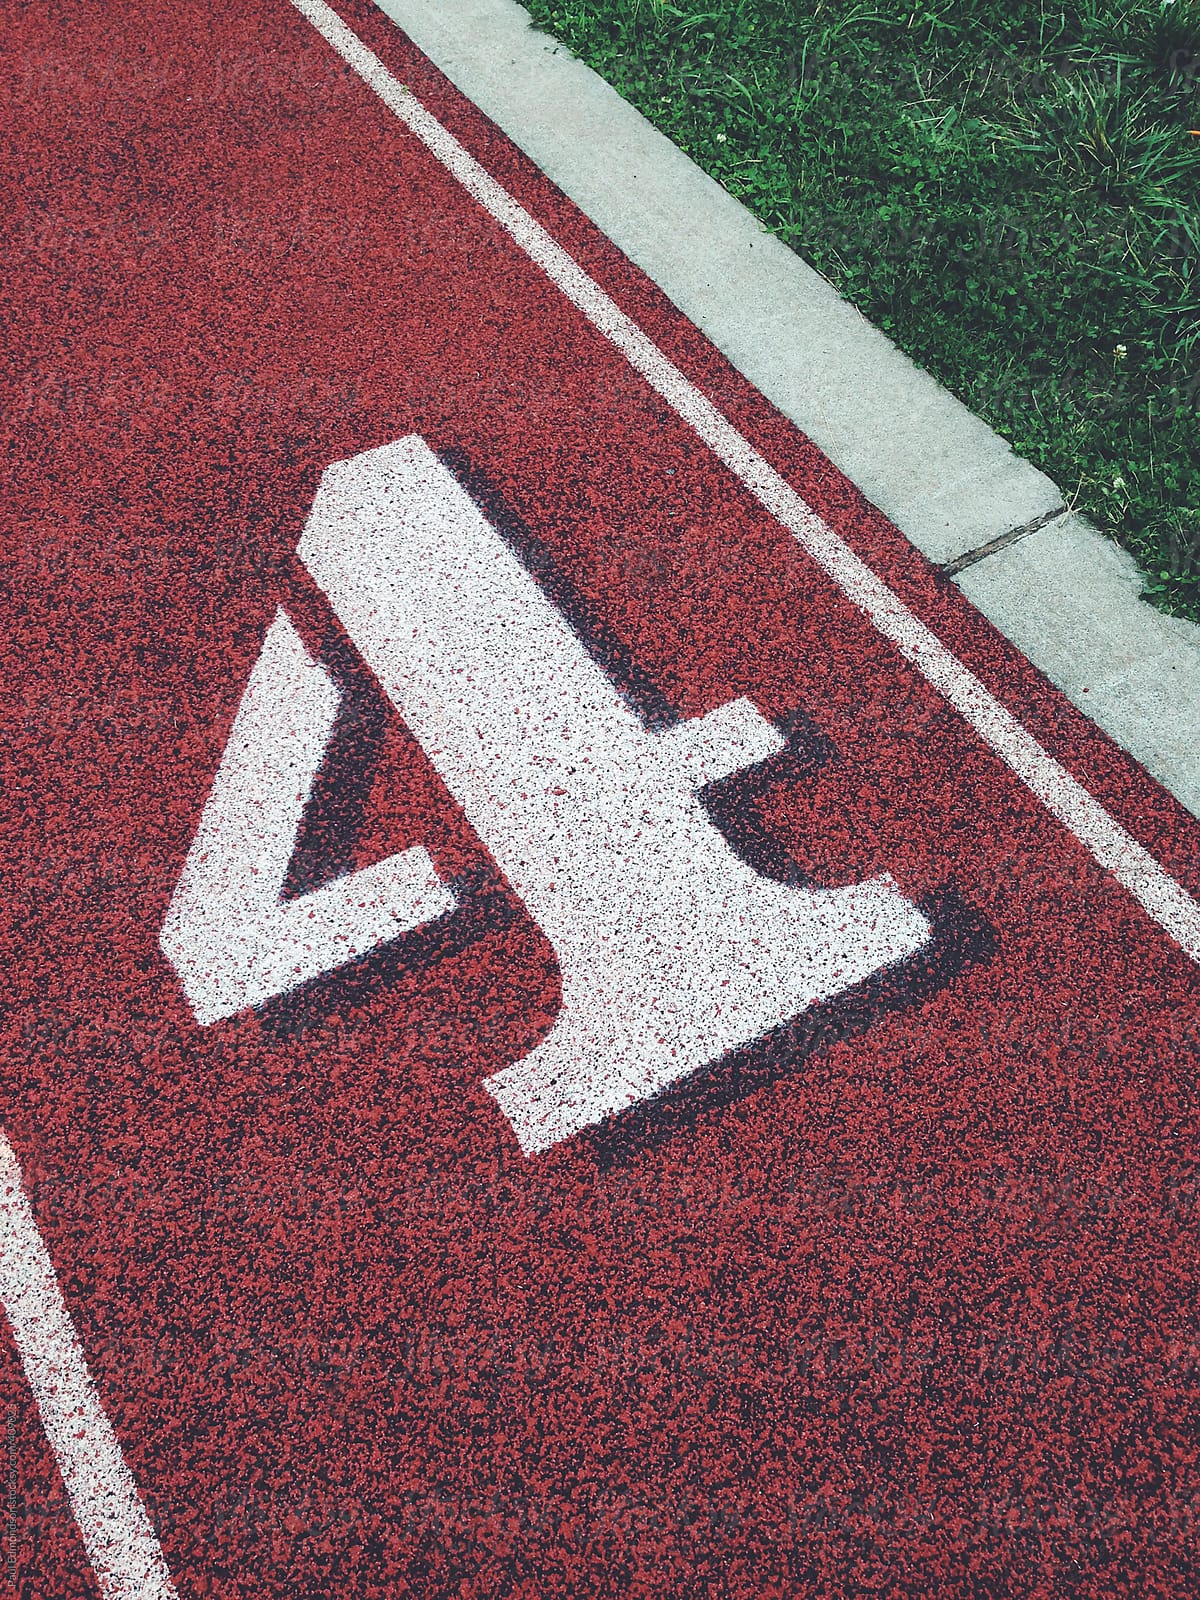 Numbers on running track, close up